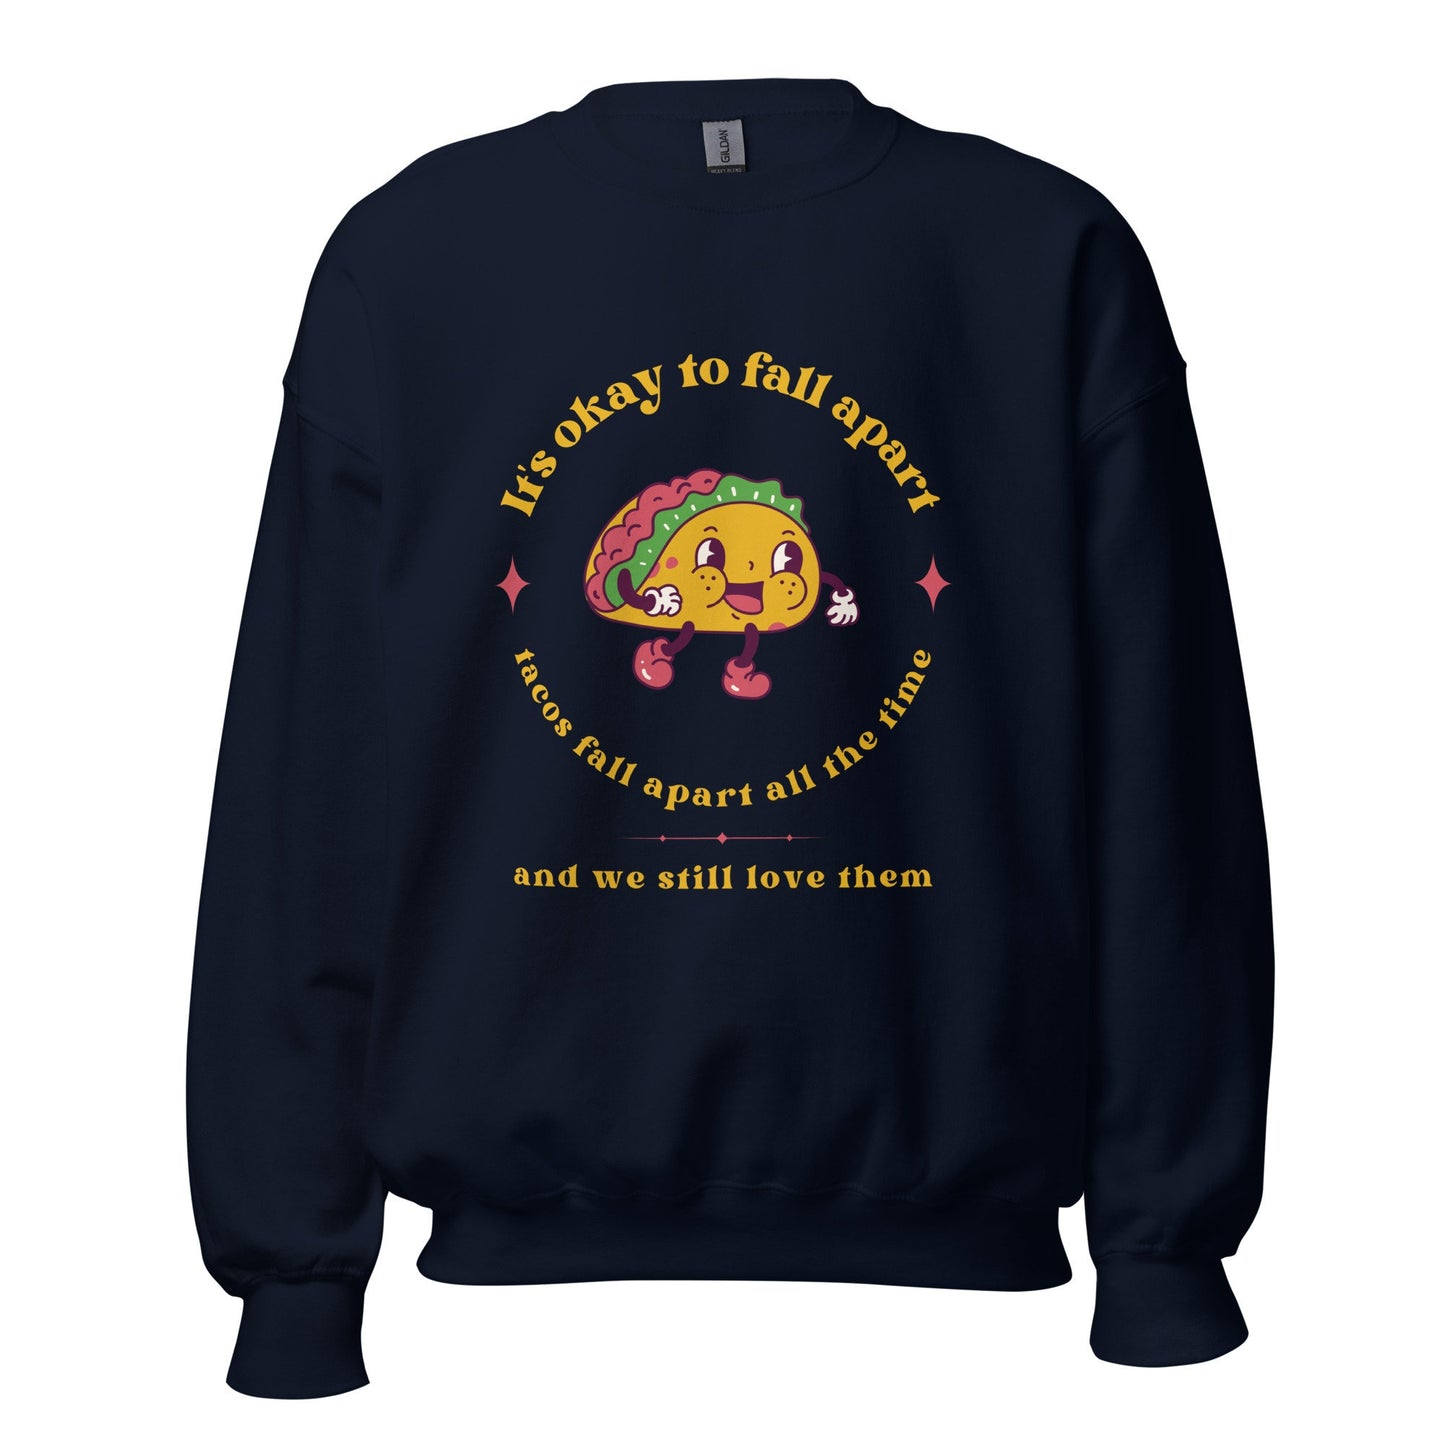 Mental Health Sweatshirt &#39;It&#39;s okay to fall apart Taco&#39;, part of profit donated to Charity, Unisex Sweater, Self Care, BPD, ADHD